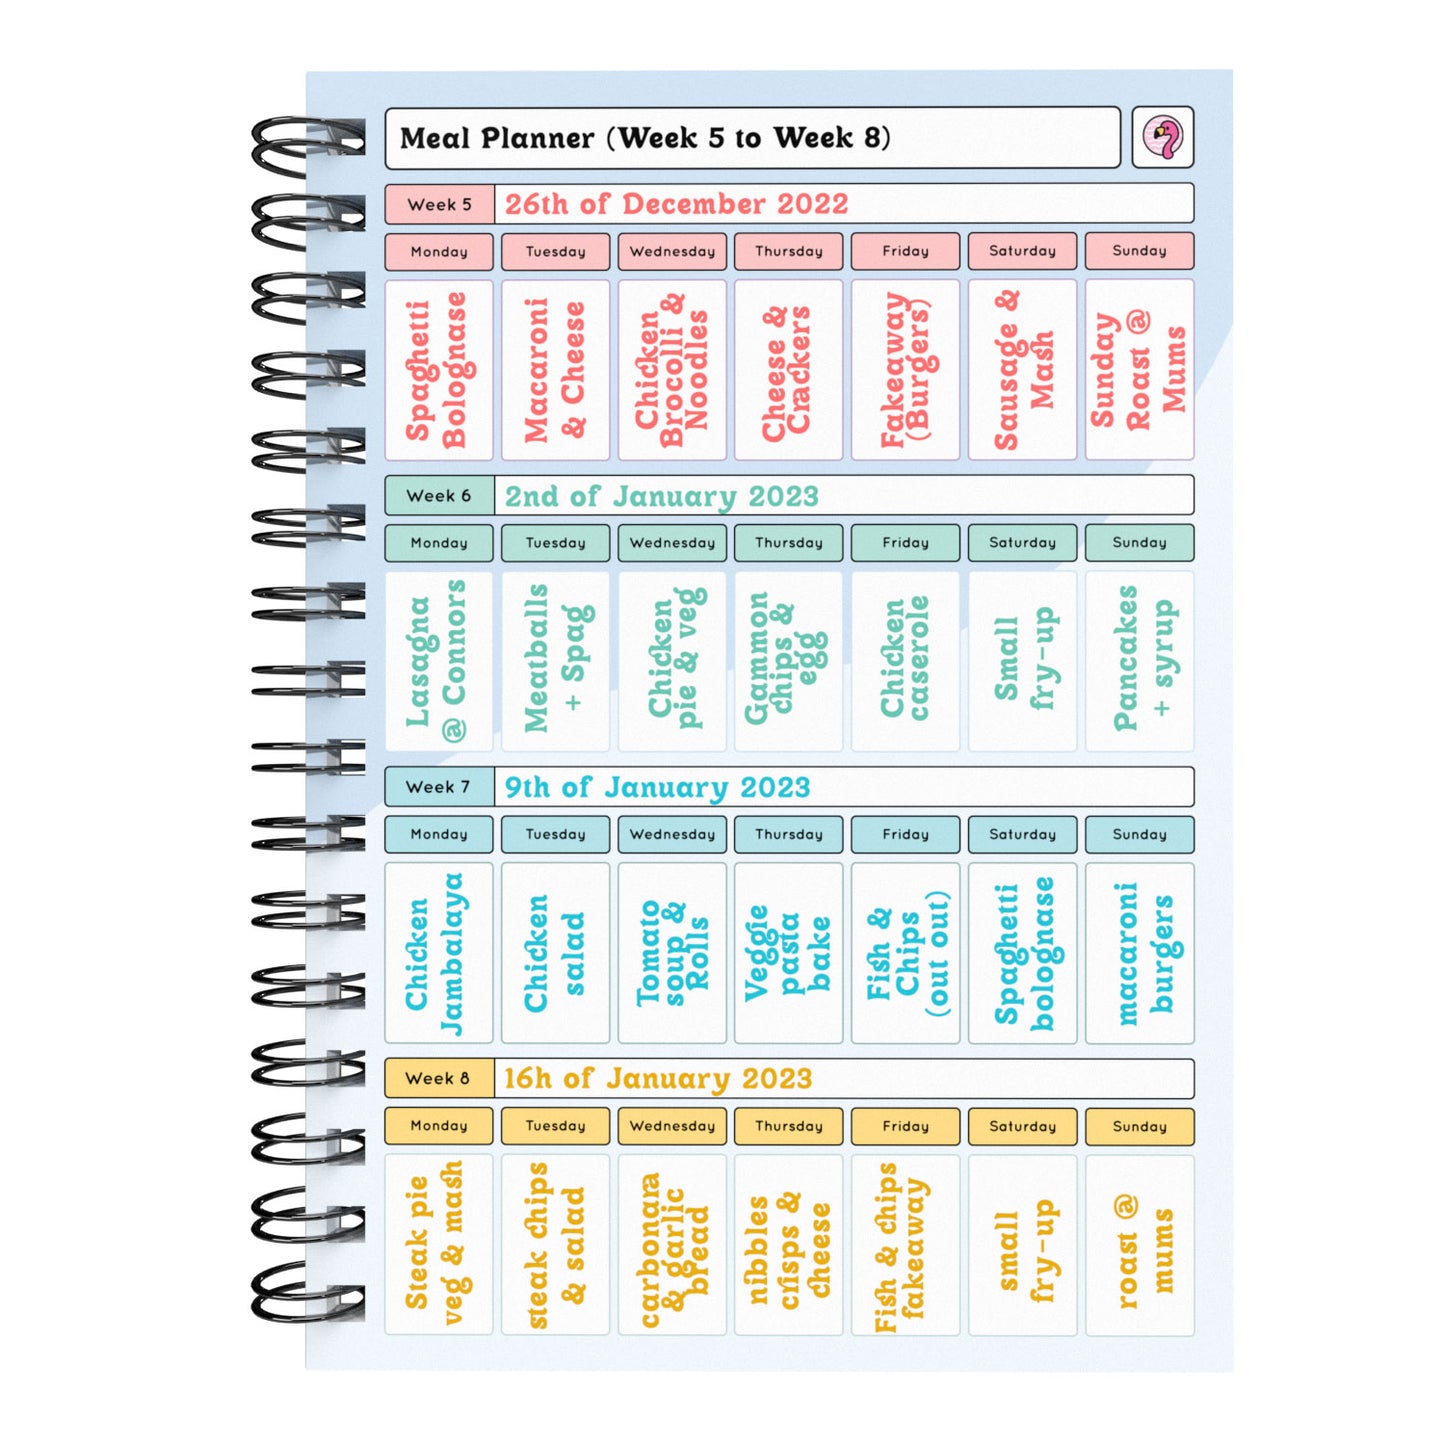 Food Diary - C23 - Calorie Counting